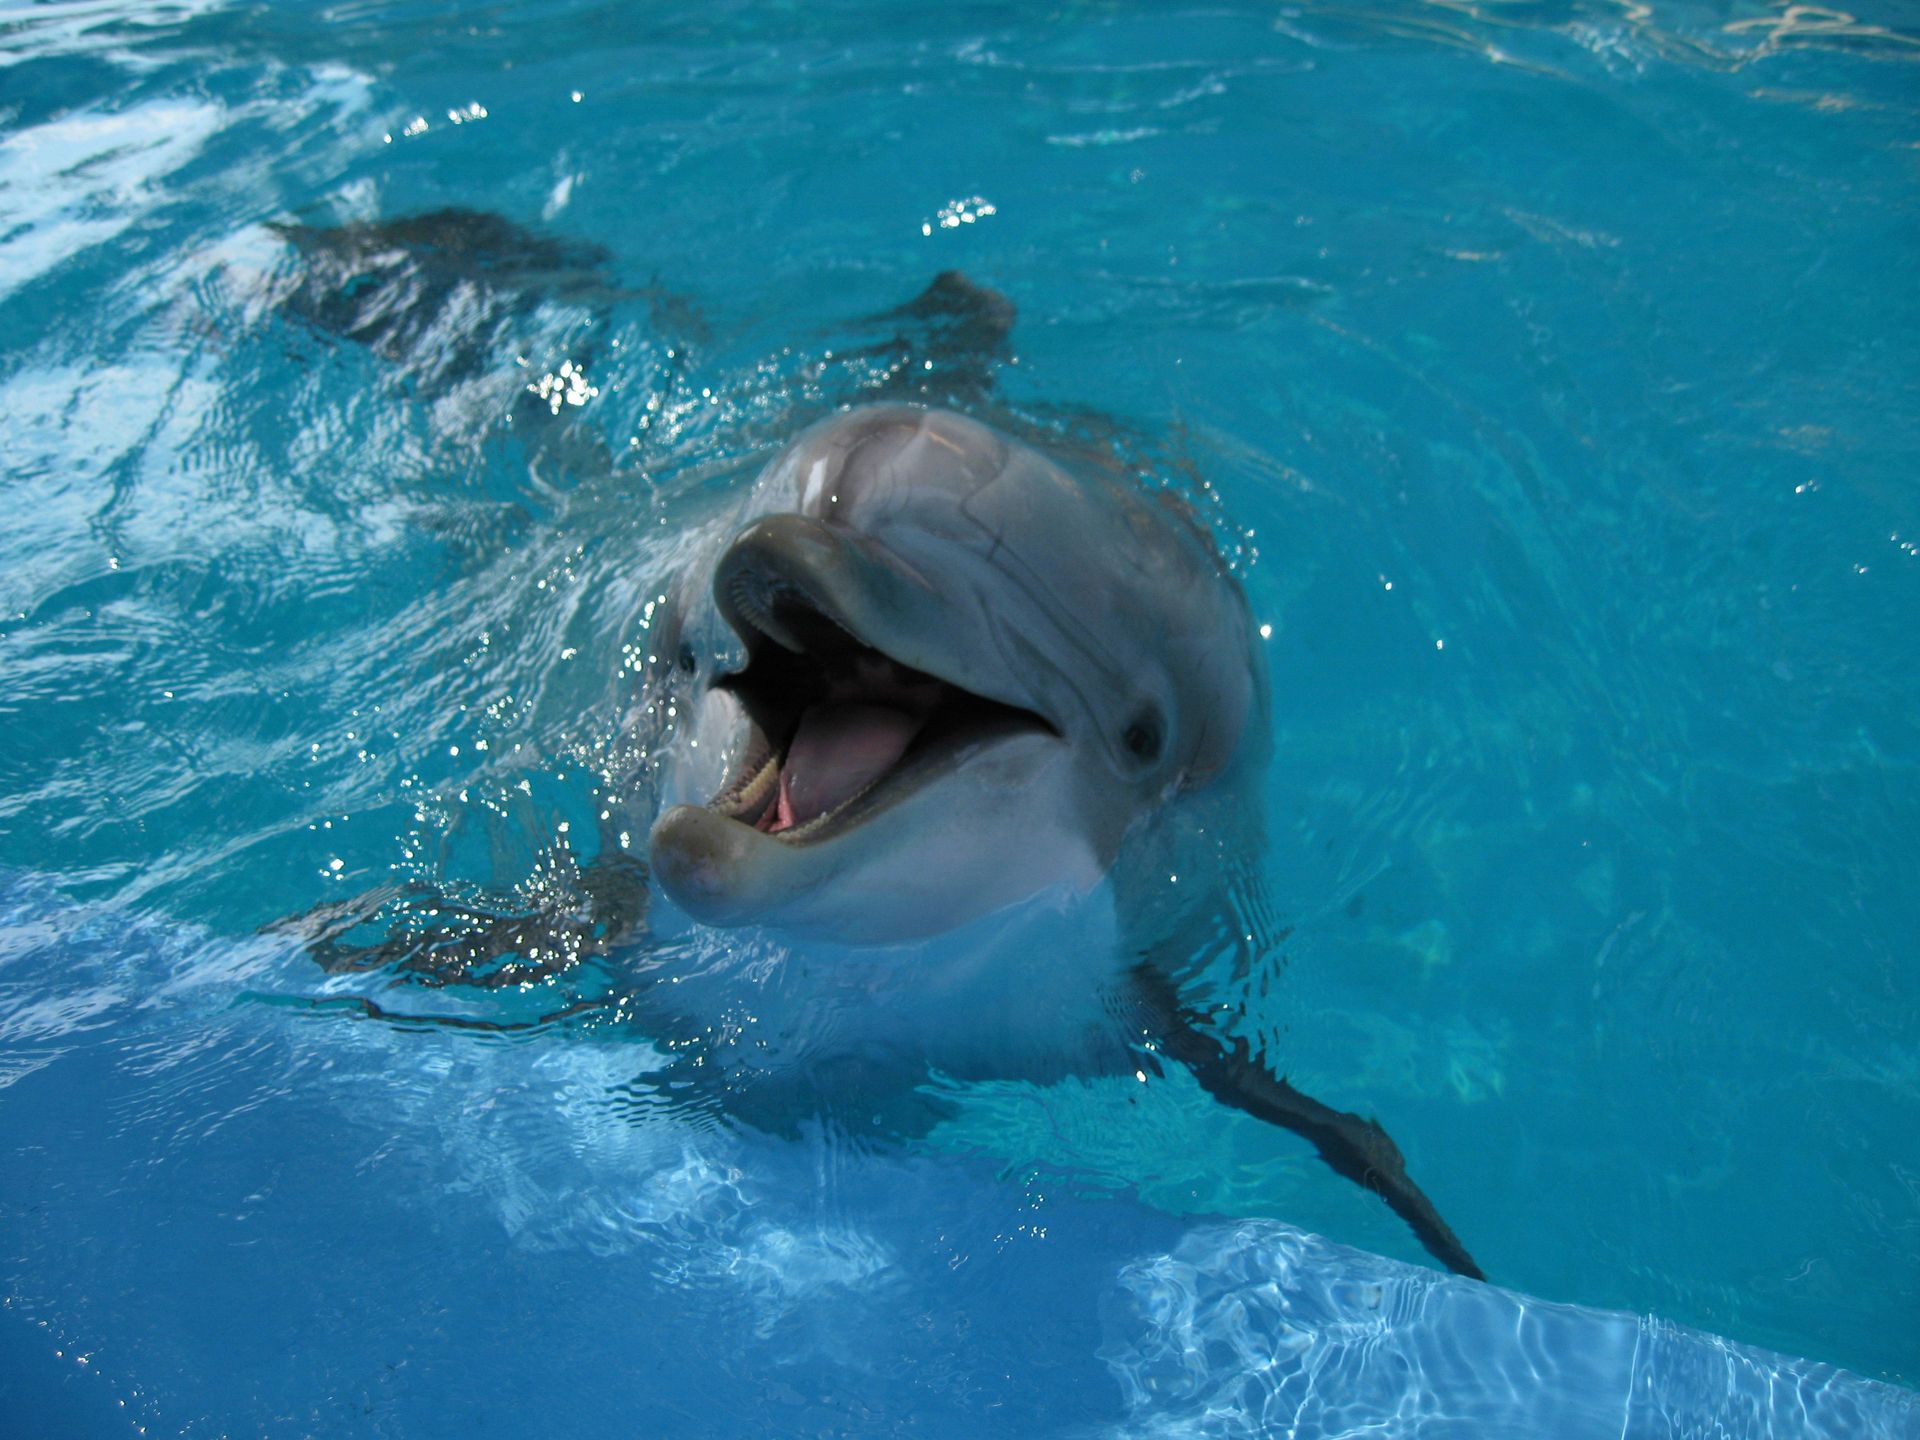 A dolphin pops out of the water while swimming.